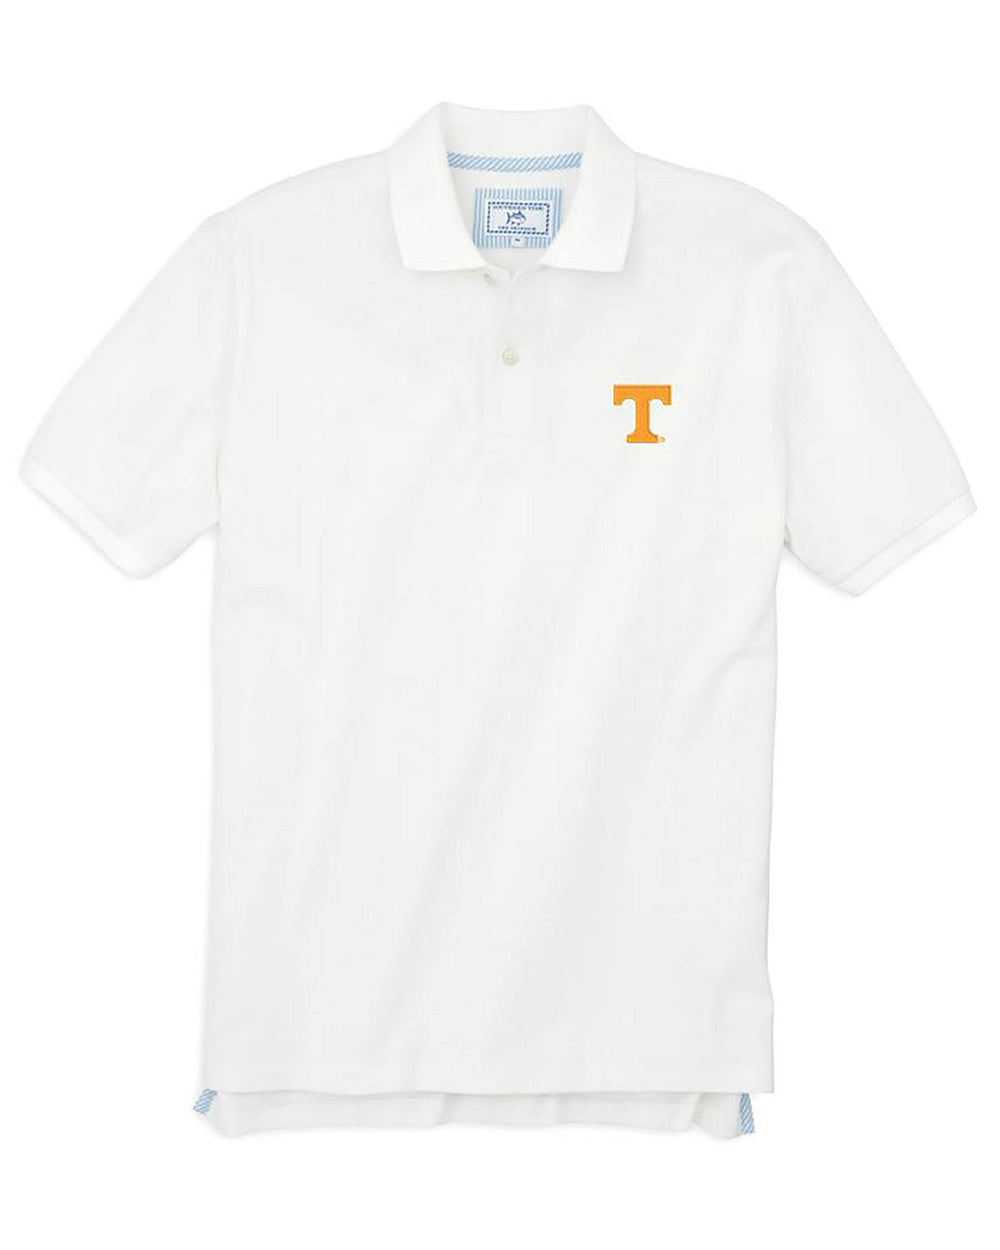 Vols, Tennessee Champion Checkered State Golf Flag Tee